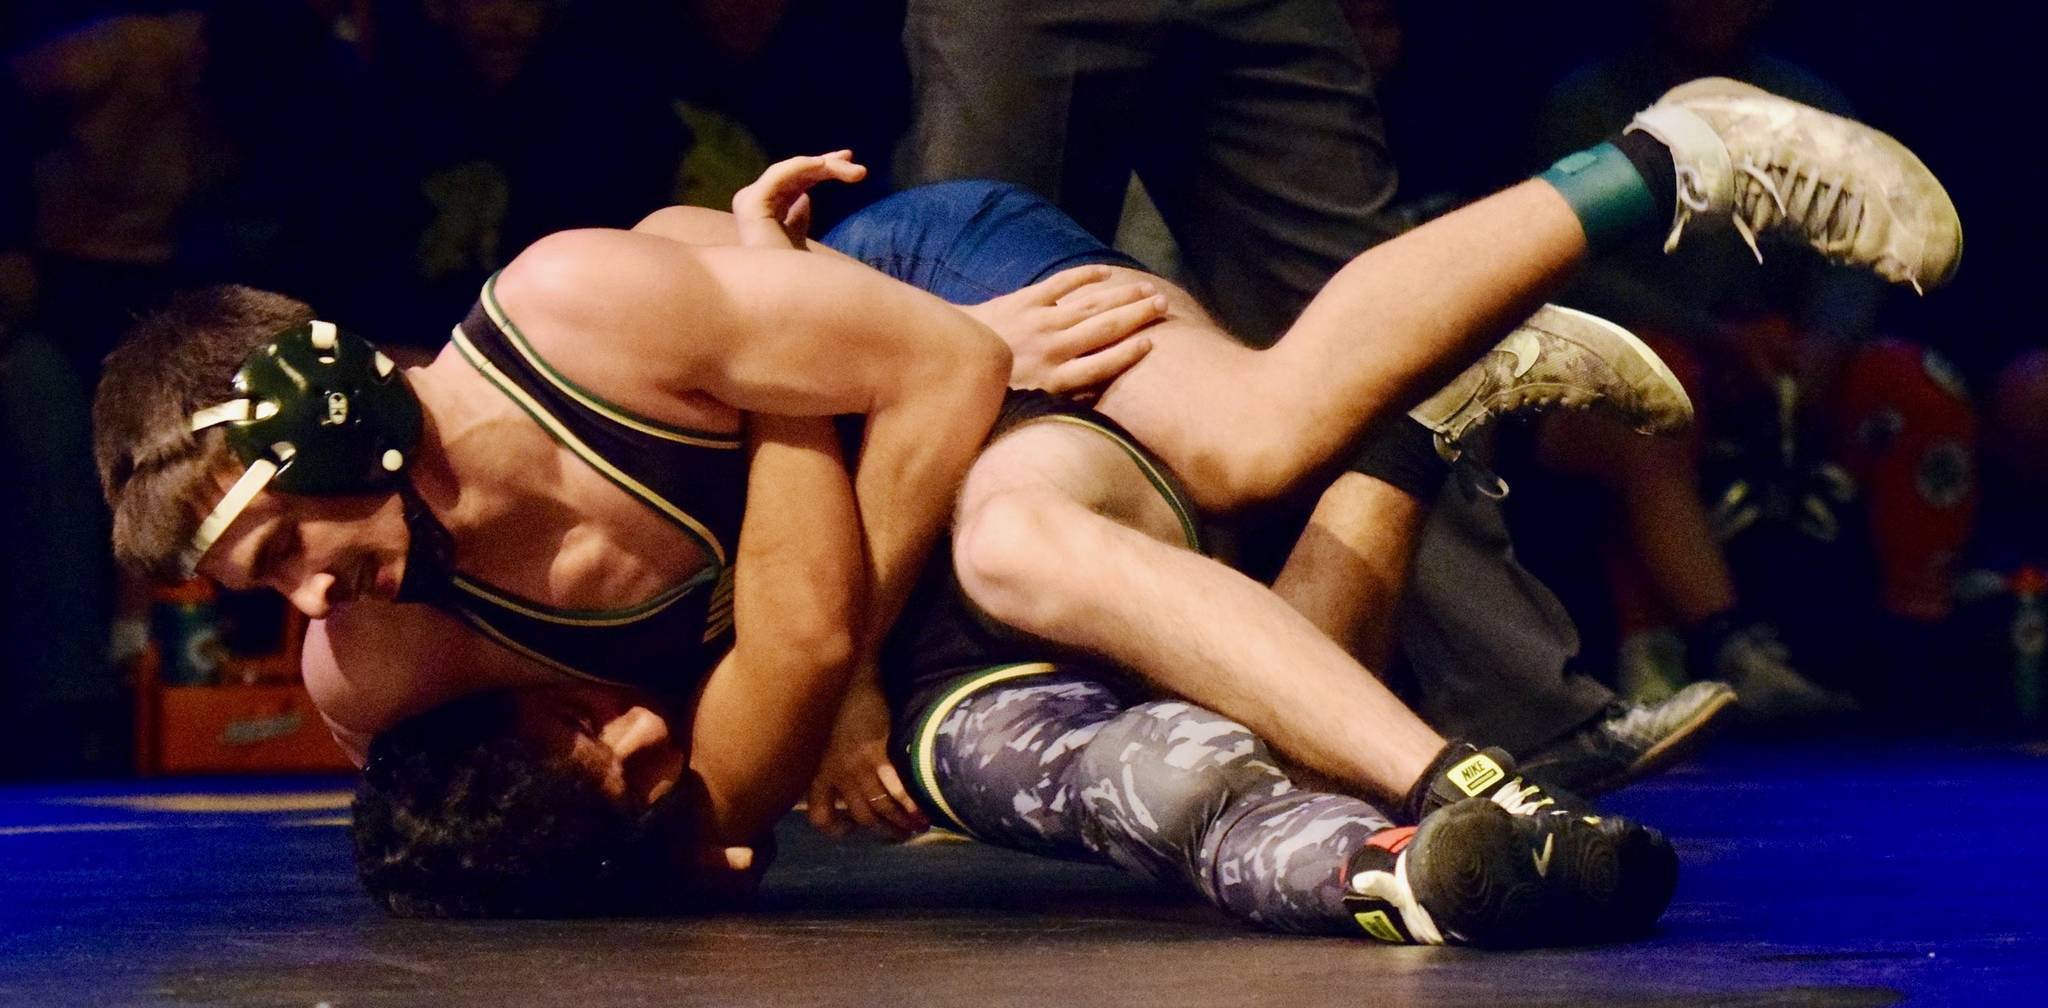 Auburn’s Gabe Sena rides Todd Beamer’s Julian Clemans before delivering a pin in the second round of their 132-pound match last Wednesday, Jan. 9, at the Auburn Performing Arts Center. RACHEL CIAMPI, Auburn Reporter